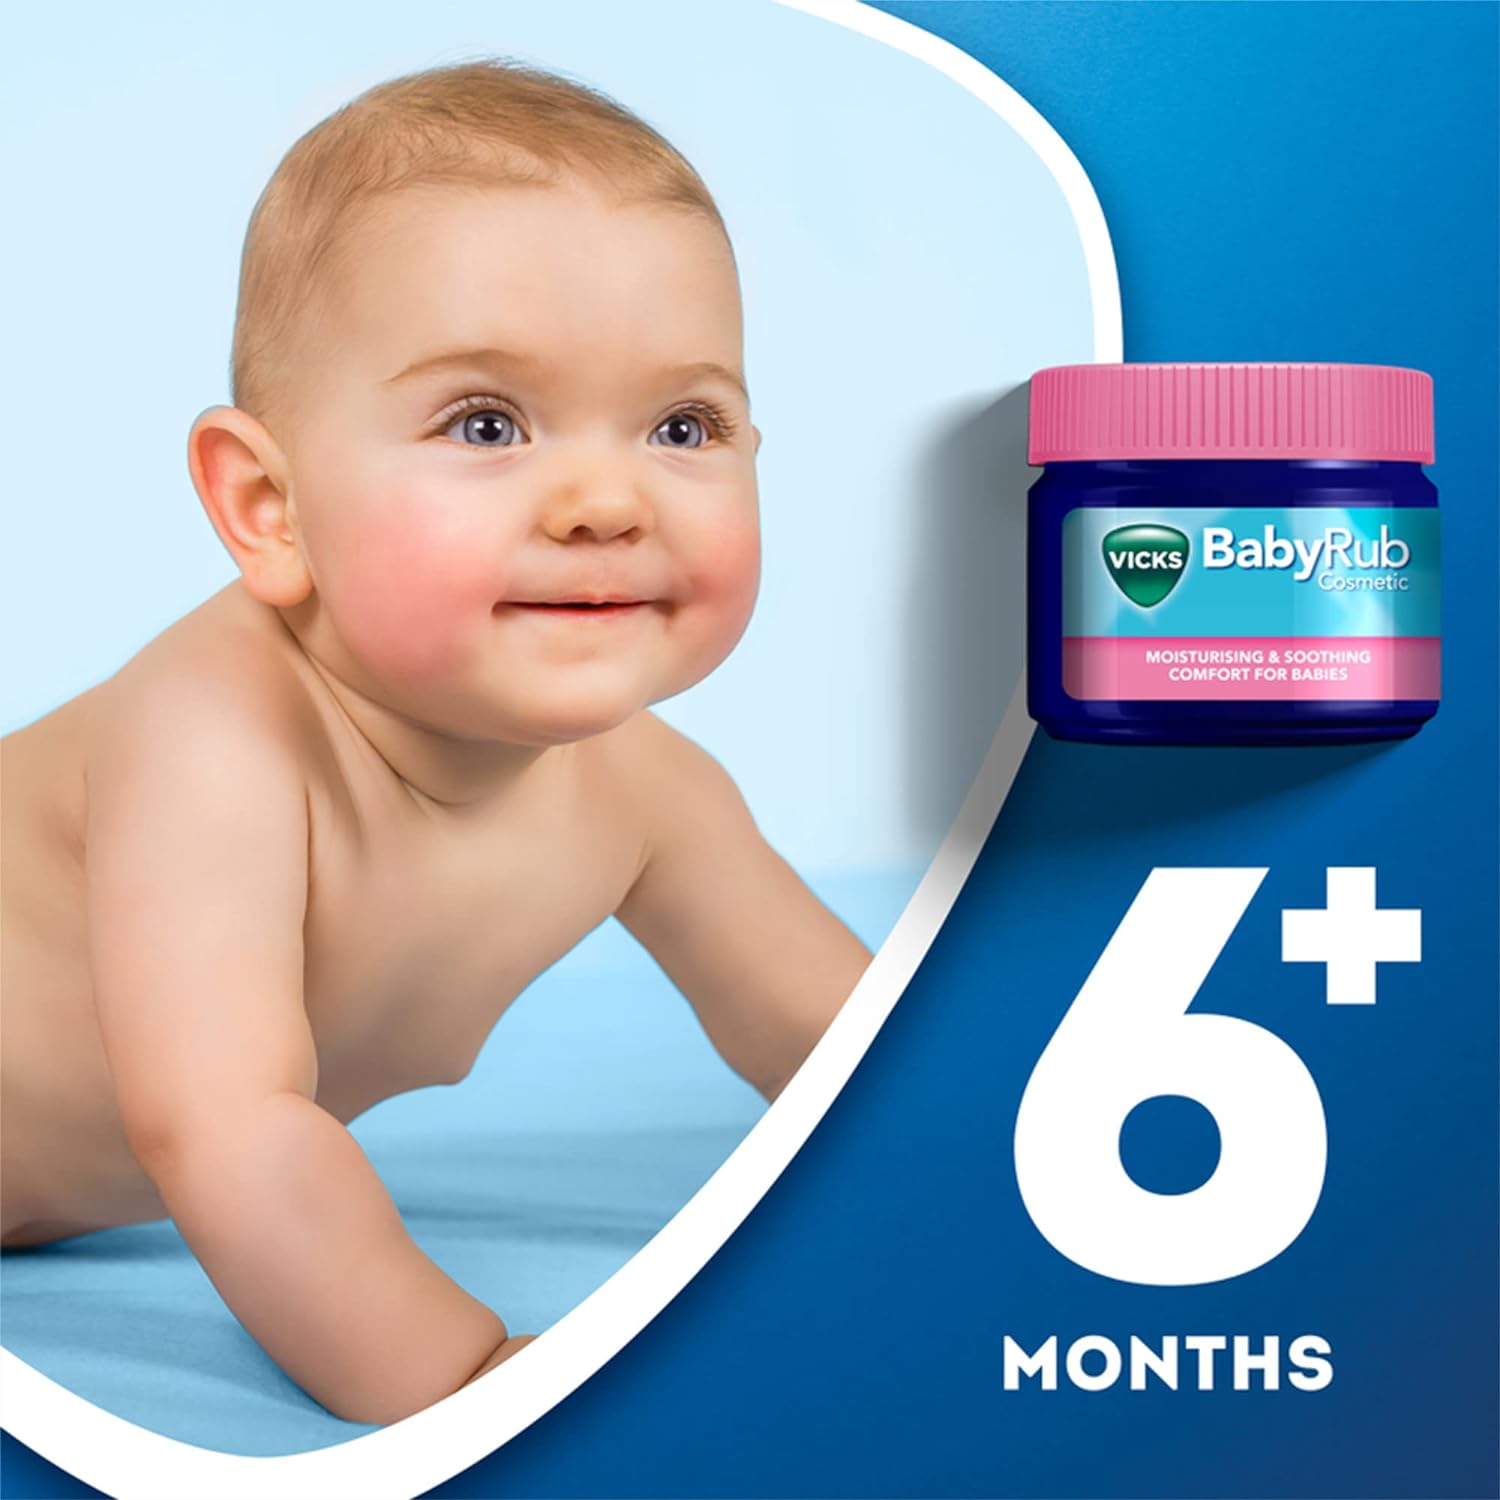 Vicks BabyRub Ointment 6 Months +, with Fragrances Of Rosemary And Lavender, for Soothing and Relaxing Baby Massage Jar 50g